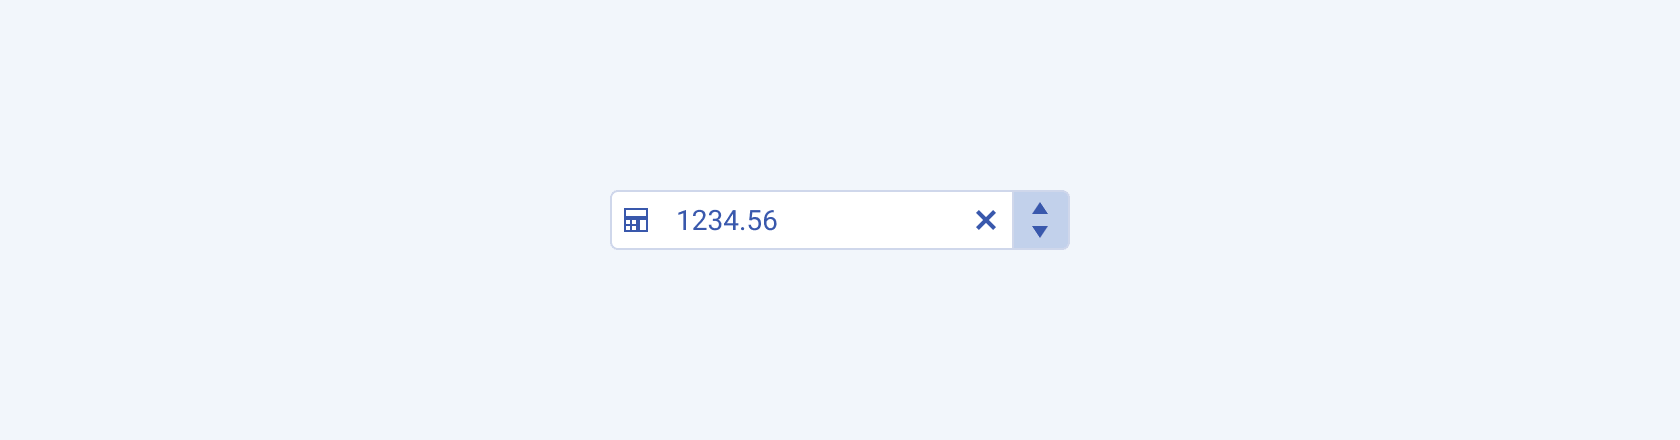 A Telerik and Kendo UI NumericTextBox component with a Clear button.